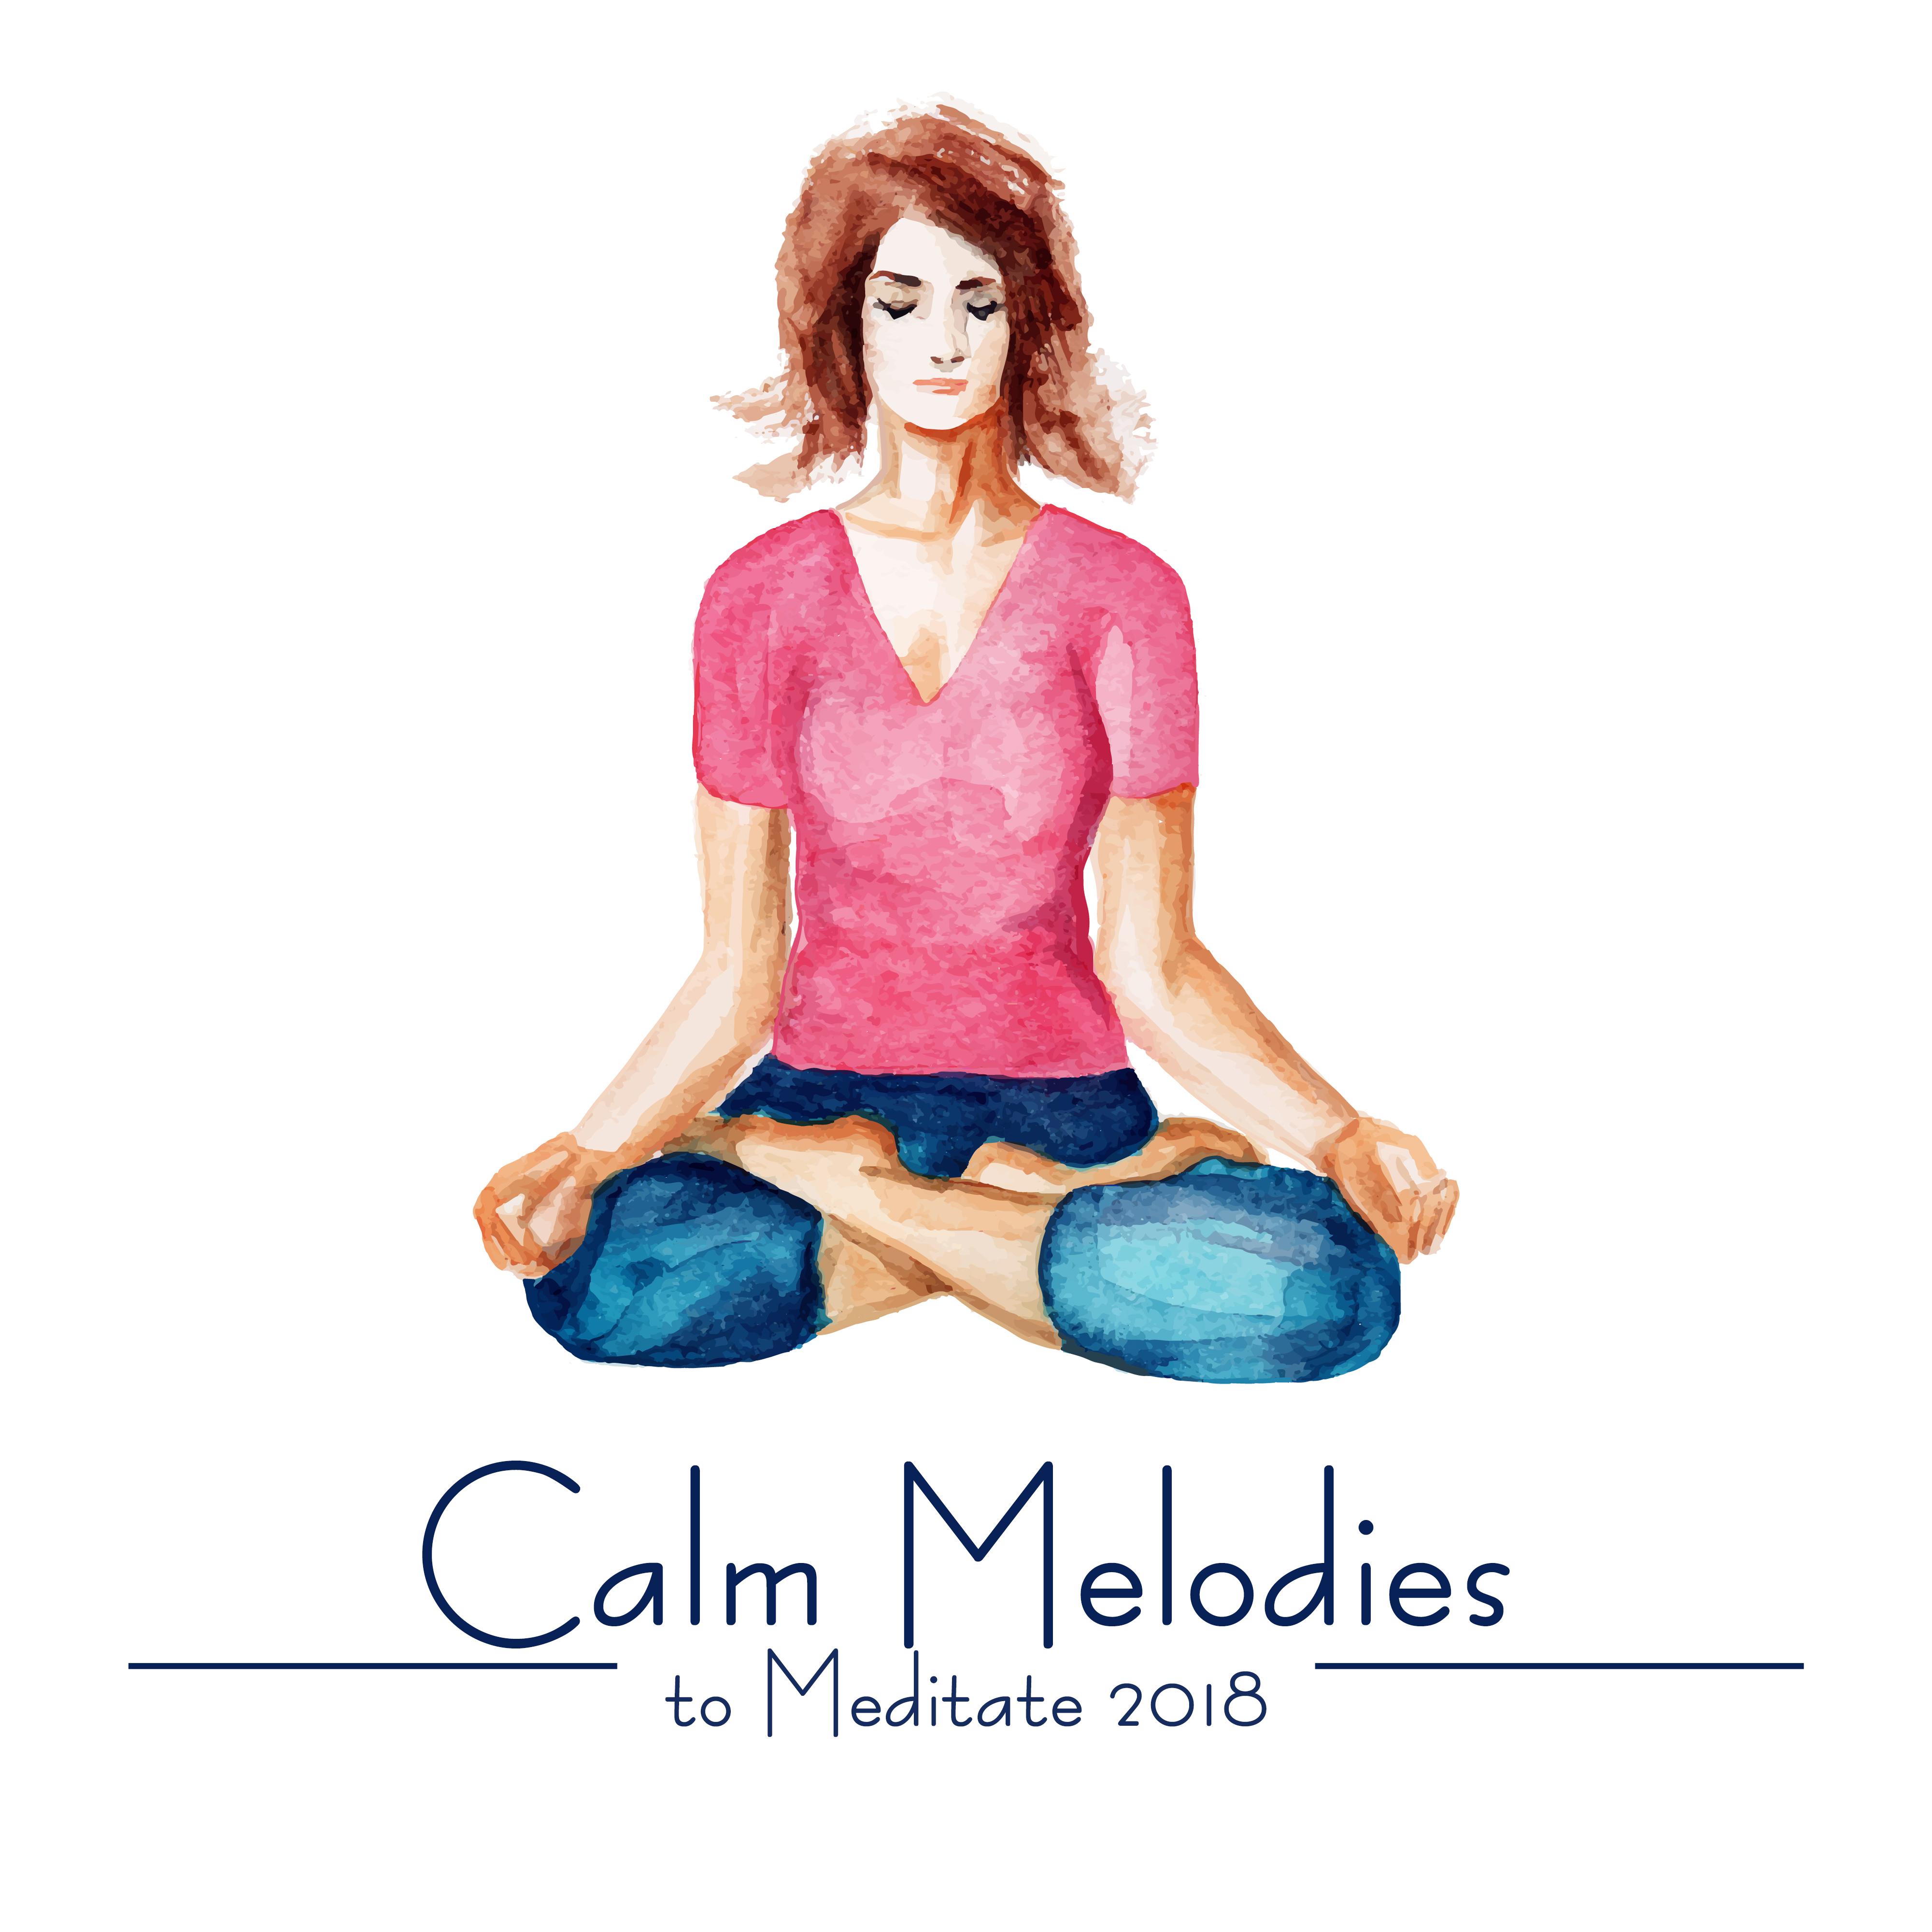 Calm Melodies to Meditate 2018